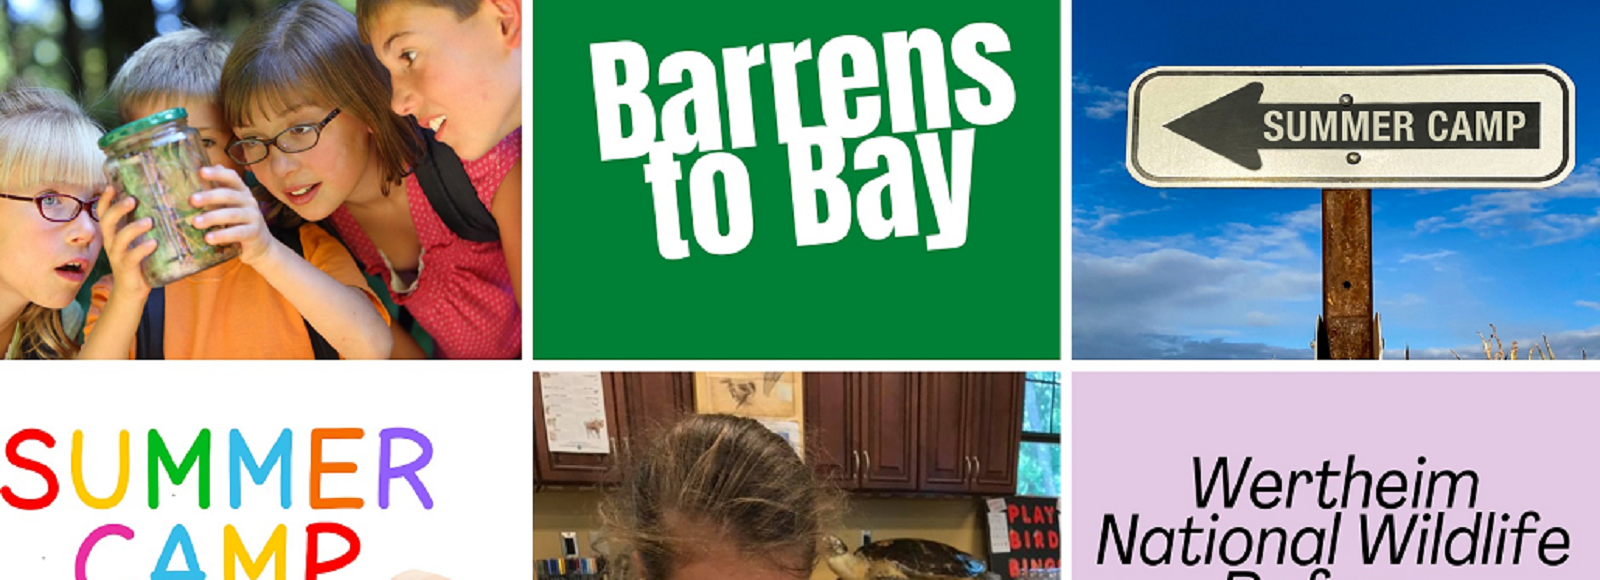 2022 Barrens to Bay Summer Camp